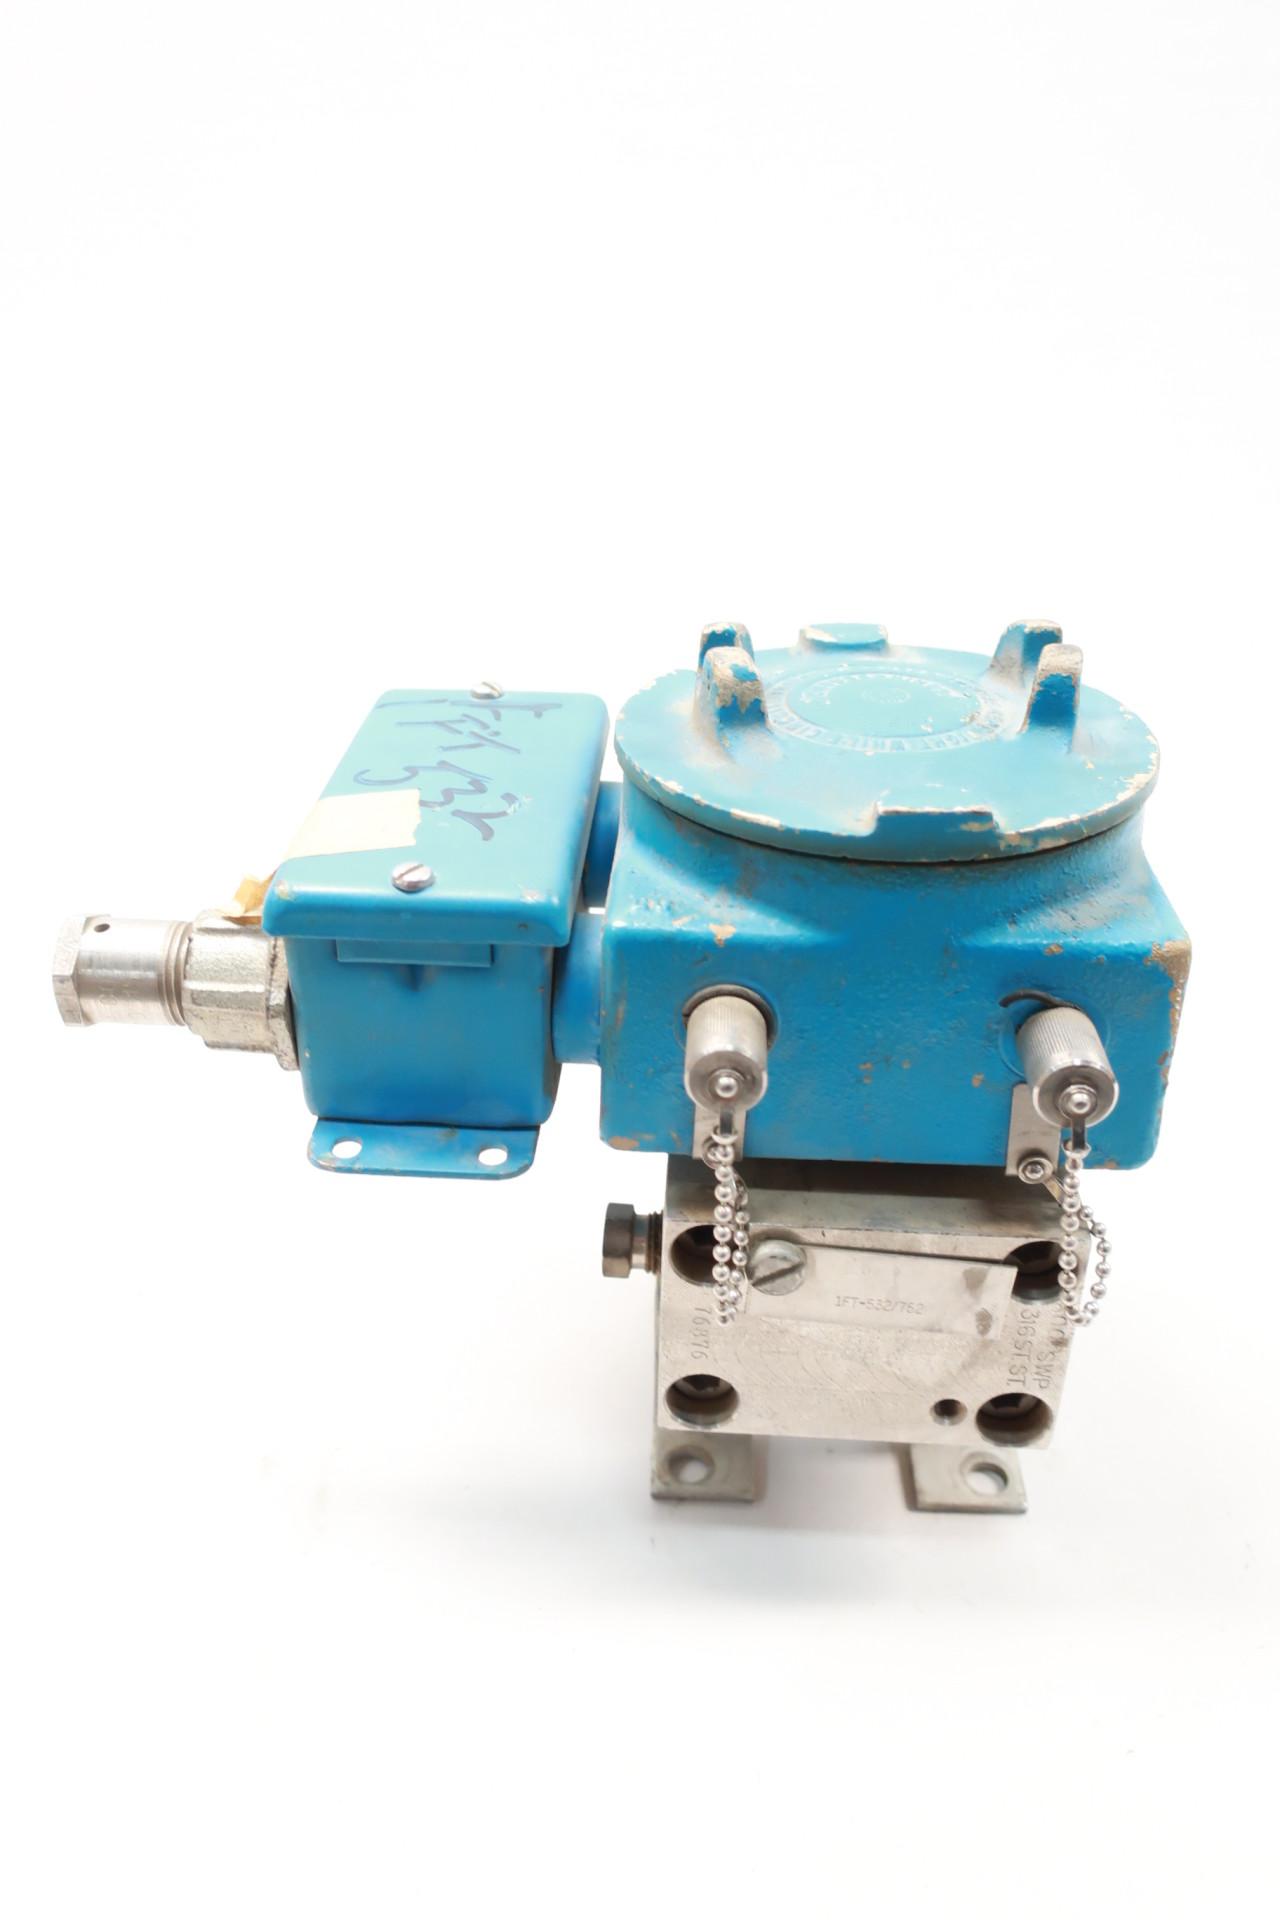 Details about   Itt Barton 752-590 Differential Pressure Transmitter 0-300in-h2o 12-70v-dc 